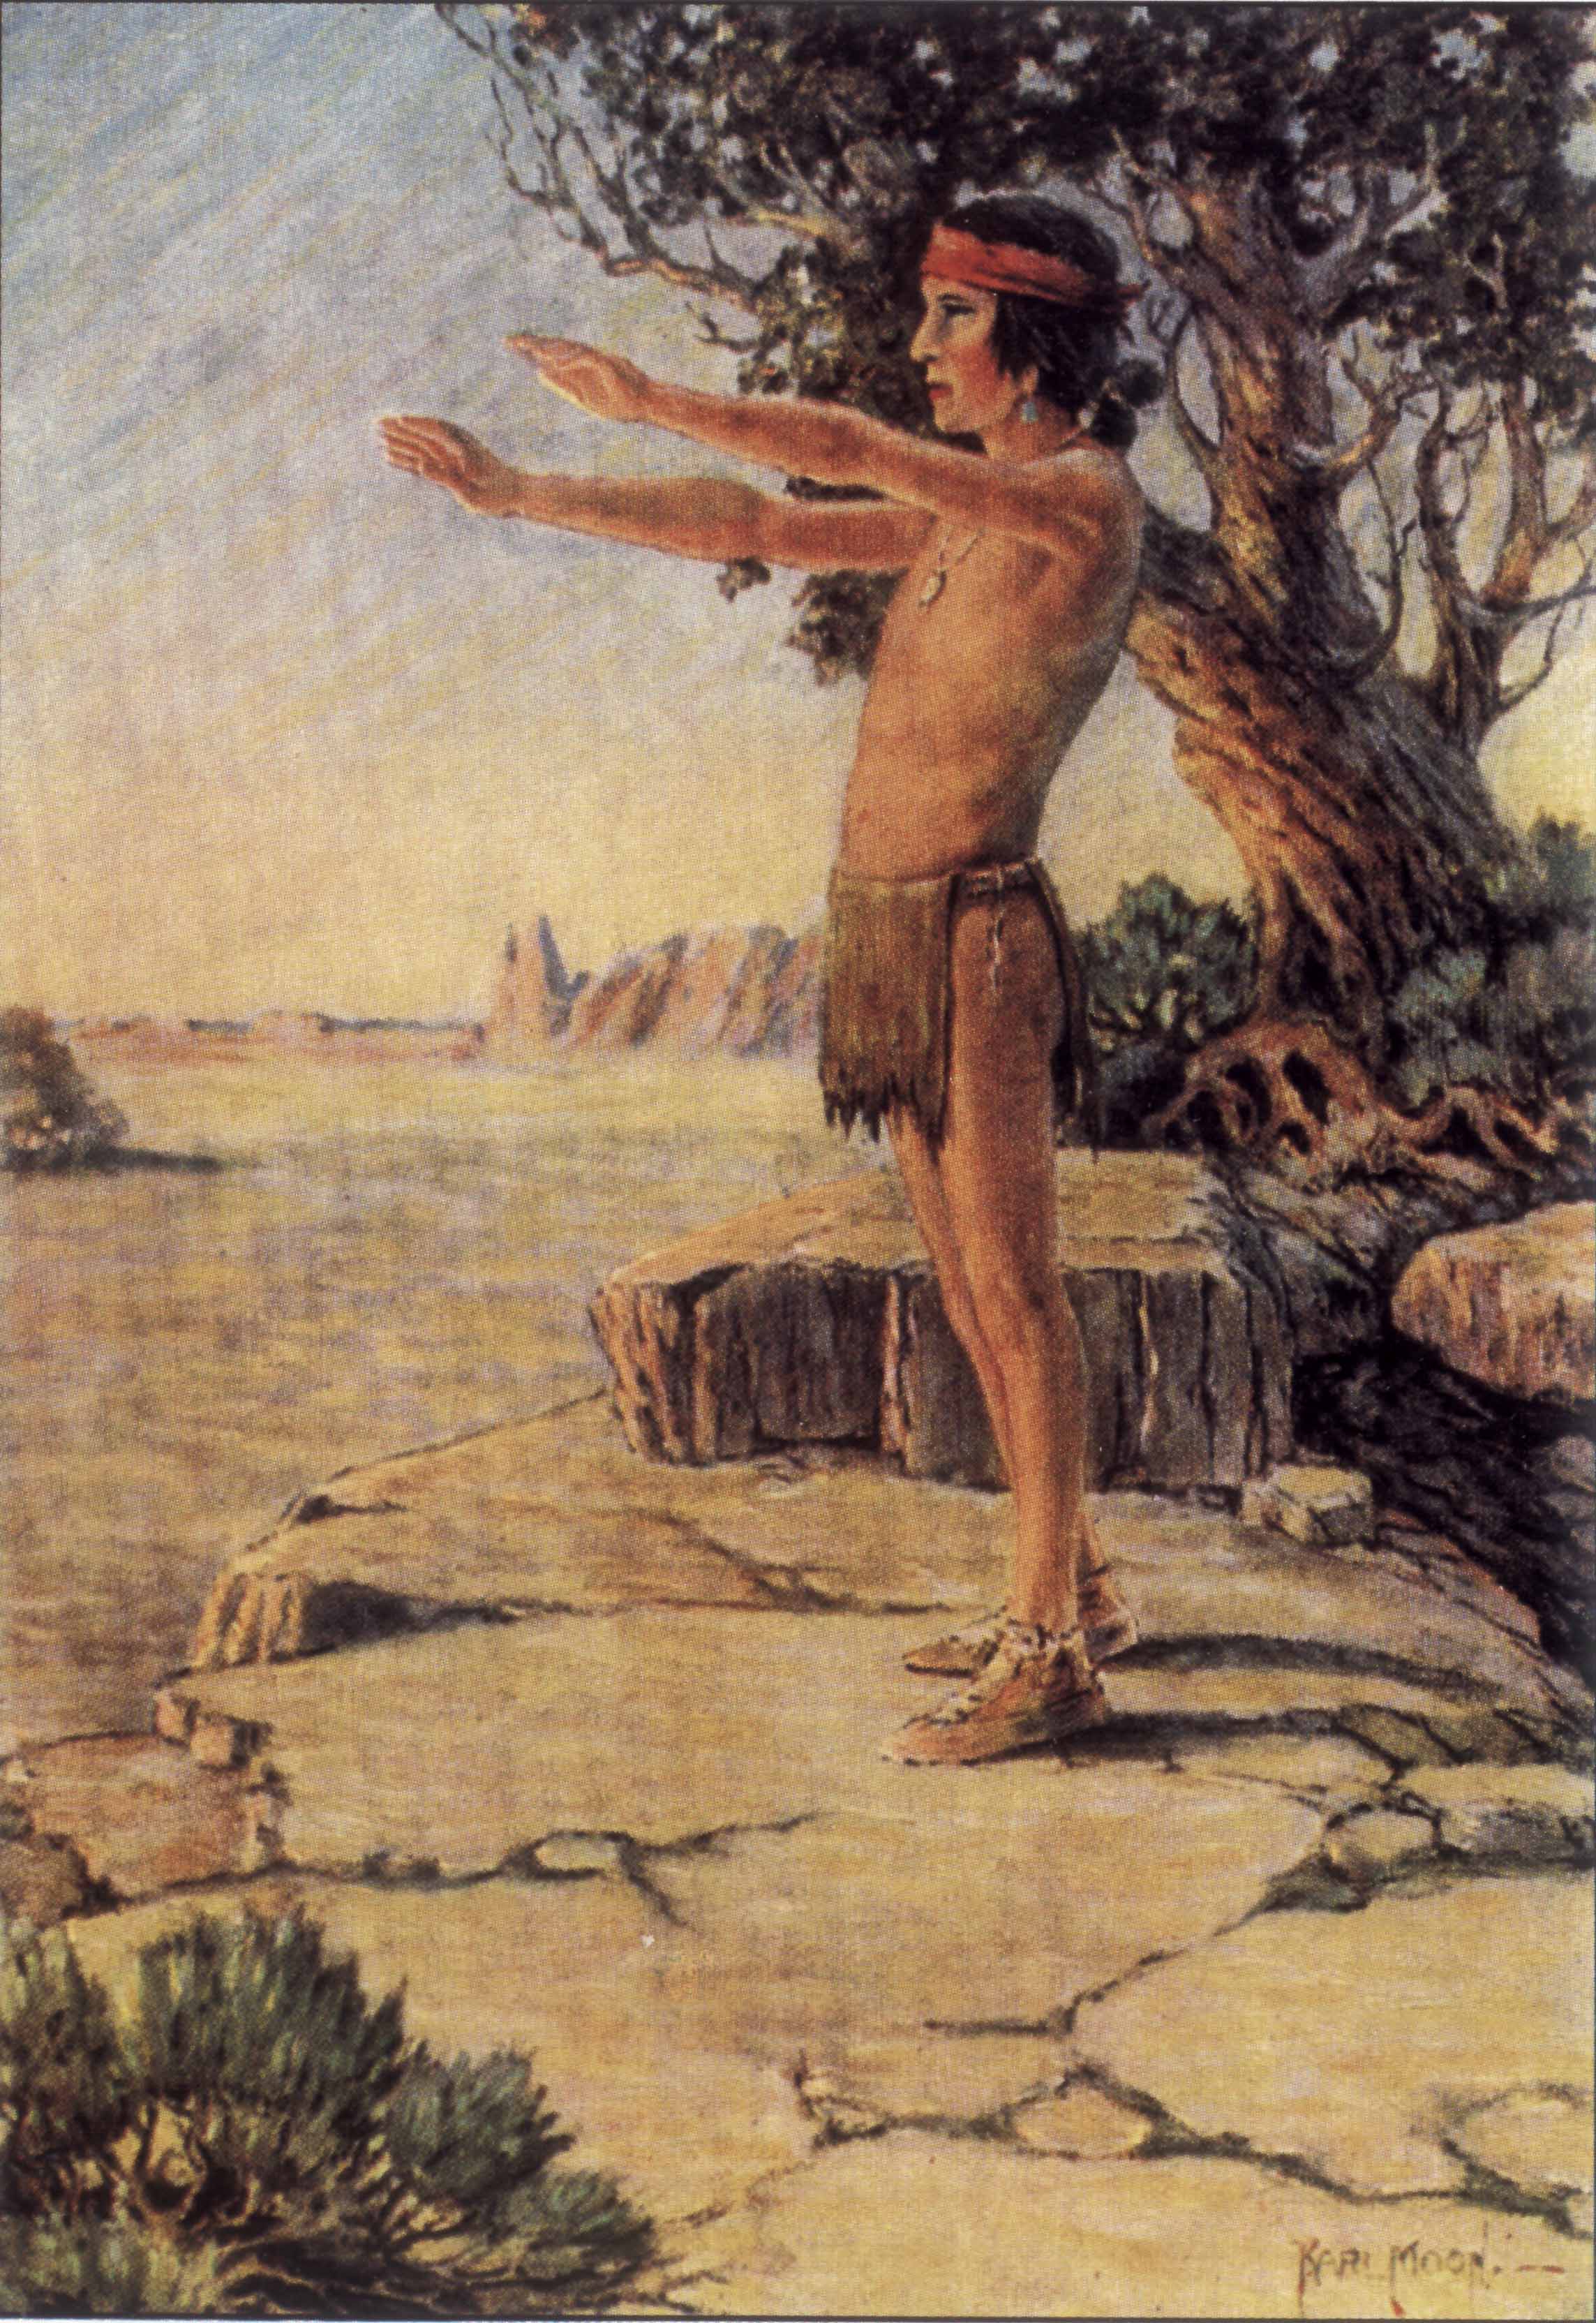 Native American man with arms outstretched. Caption: 'He raised his arms in salutation to the Great Light-Maker.'